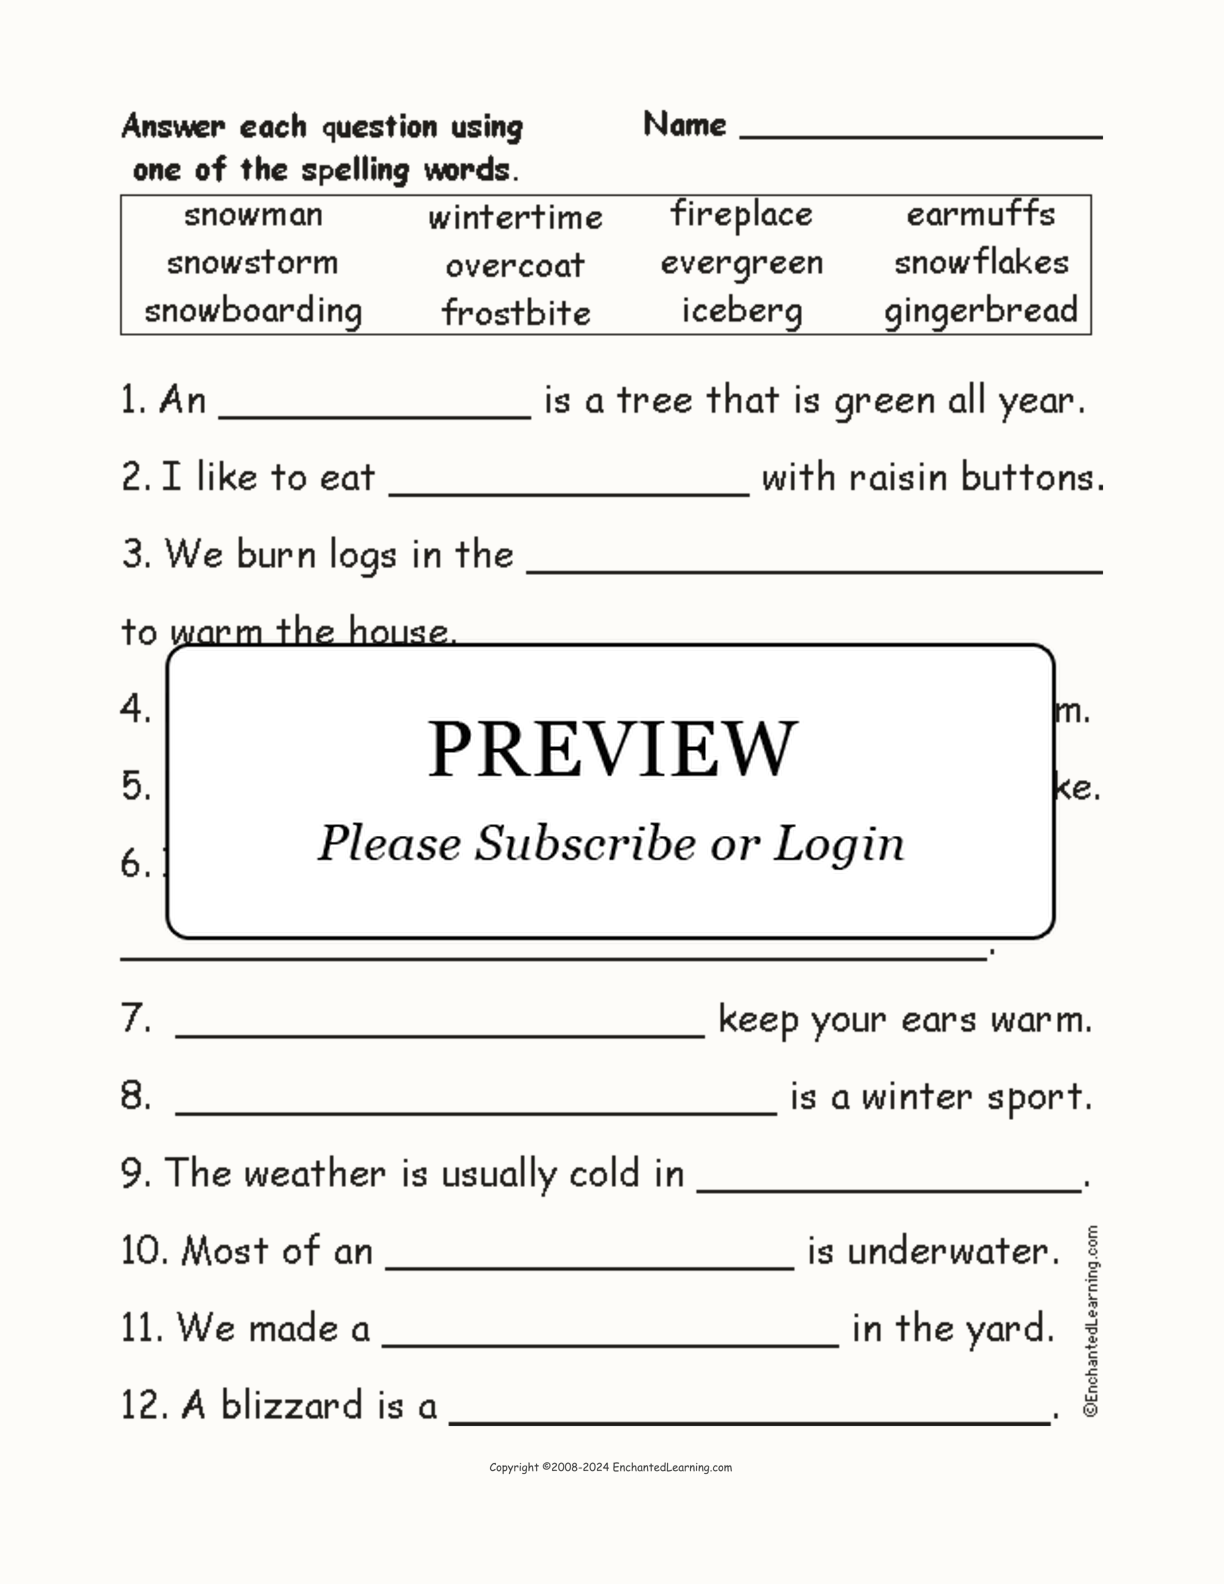 Compound Winter Words interactive worksheet page 1